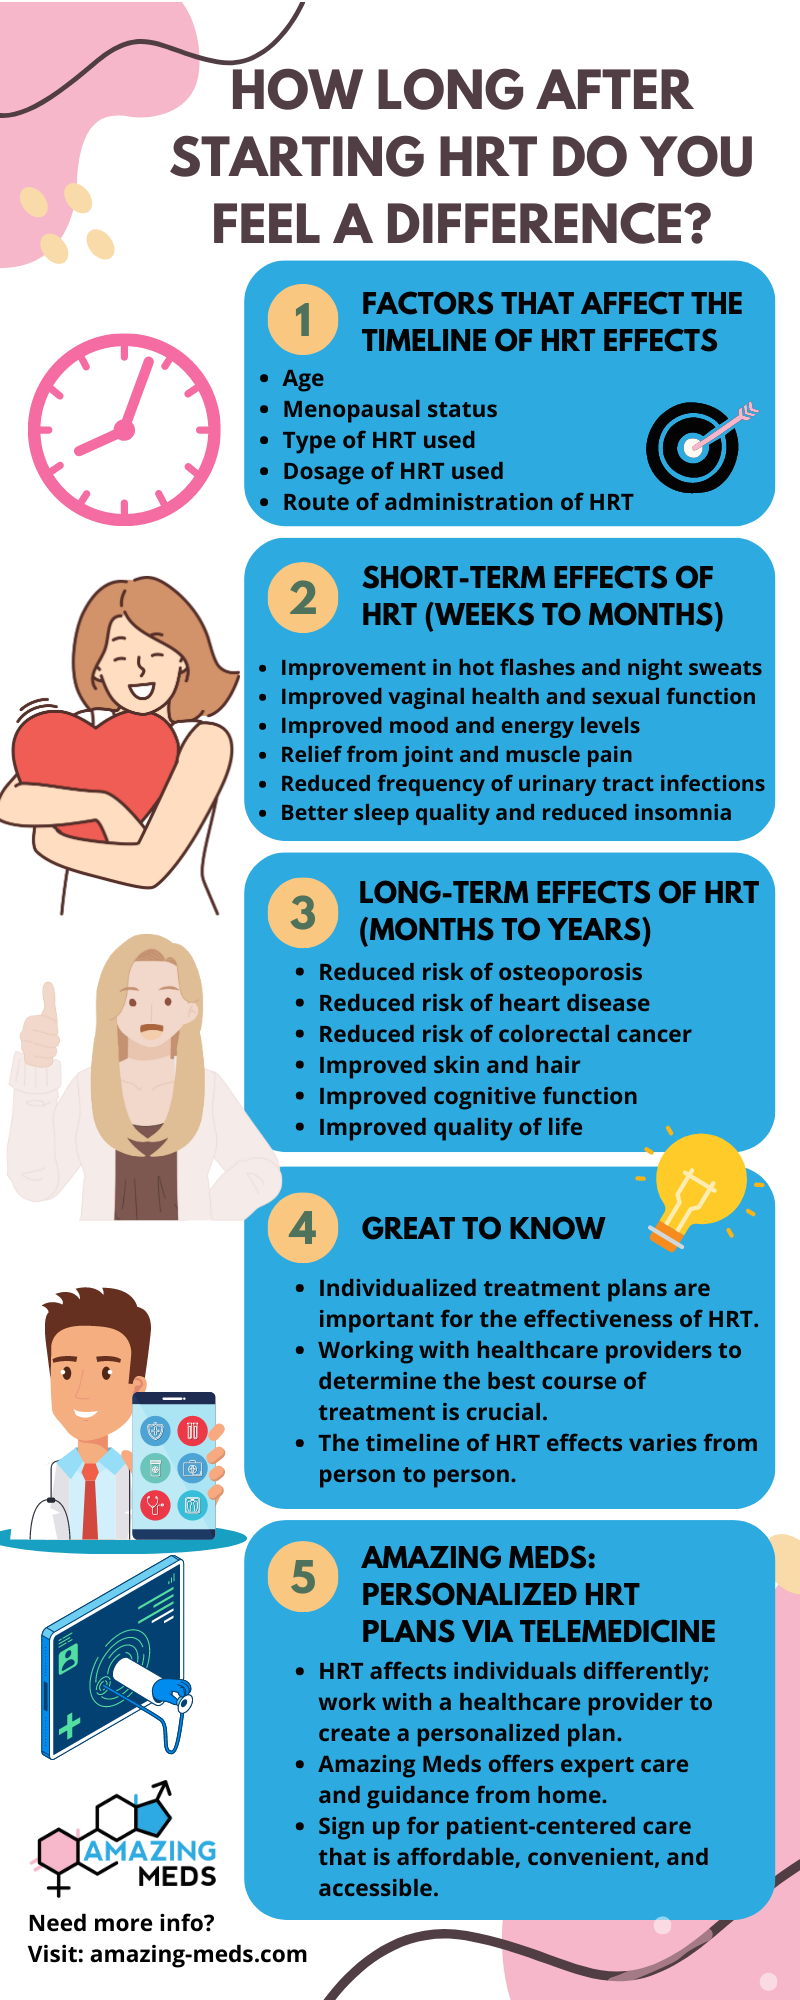 How long after starting hrt do you feel a difference? How long does hrt take to work